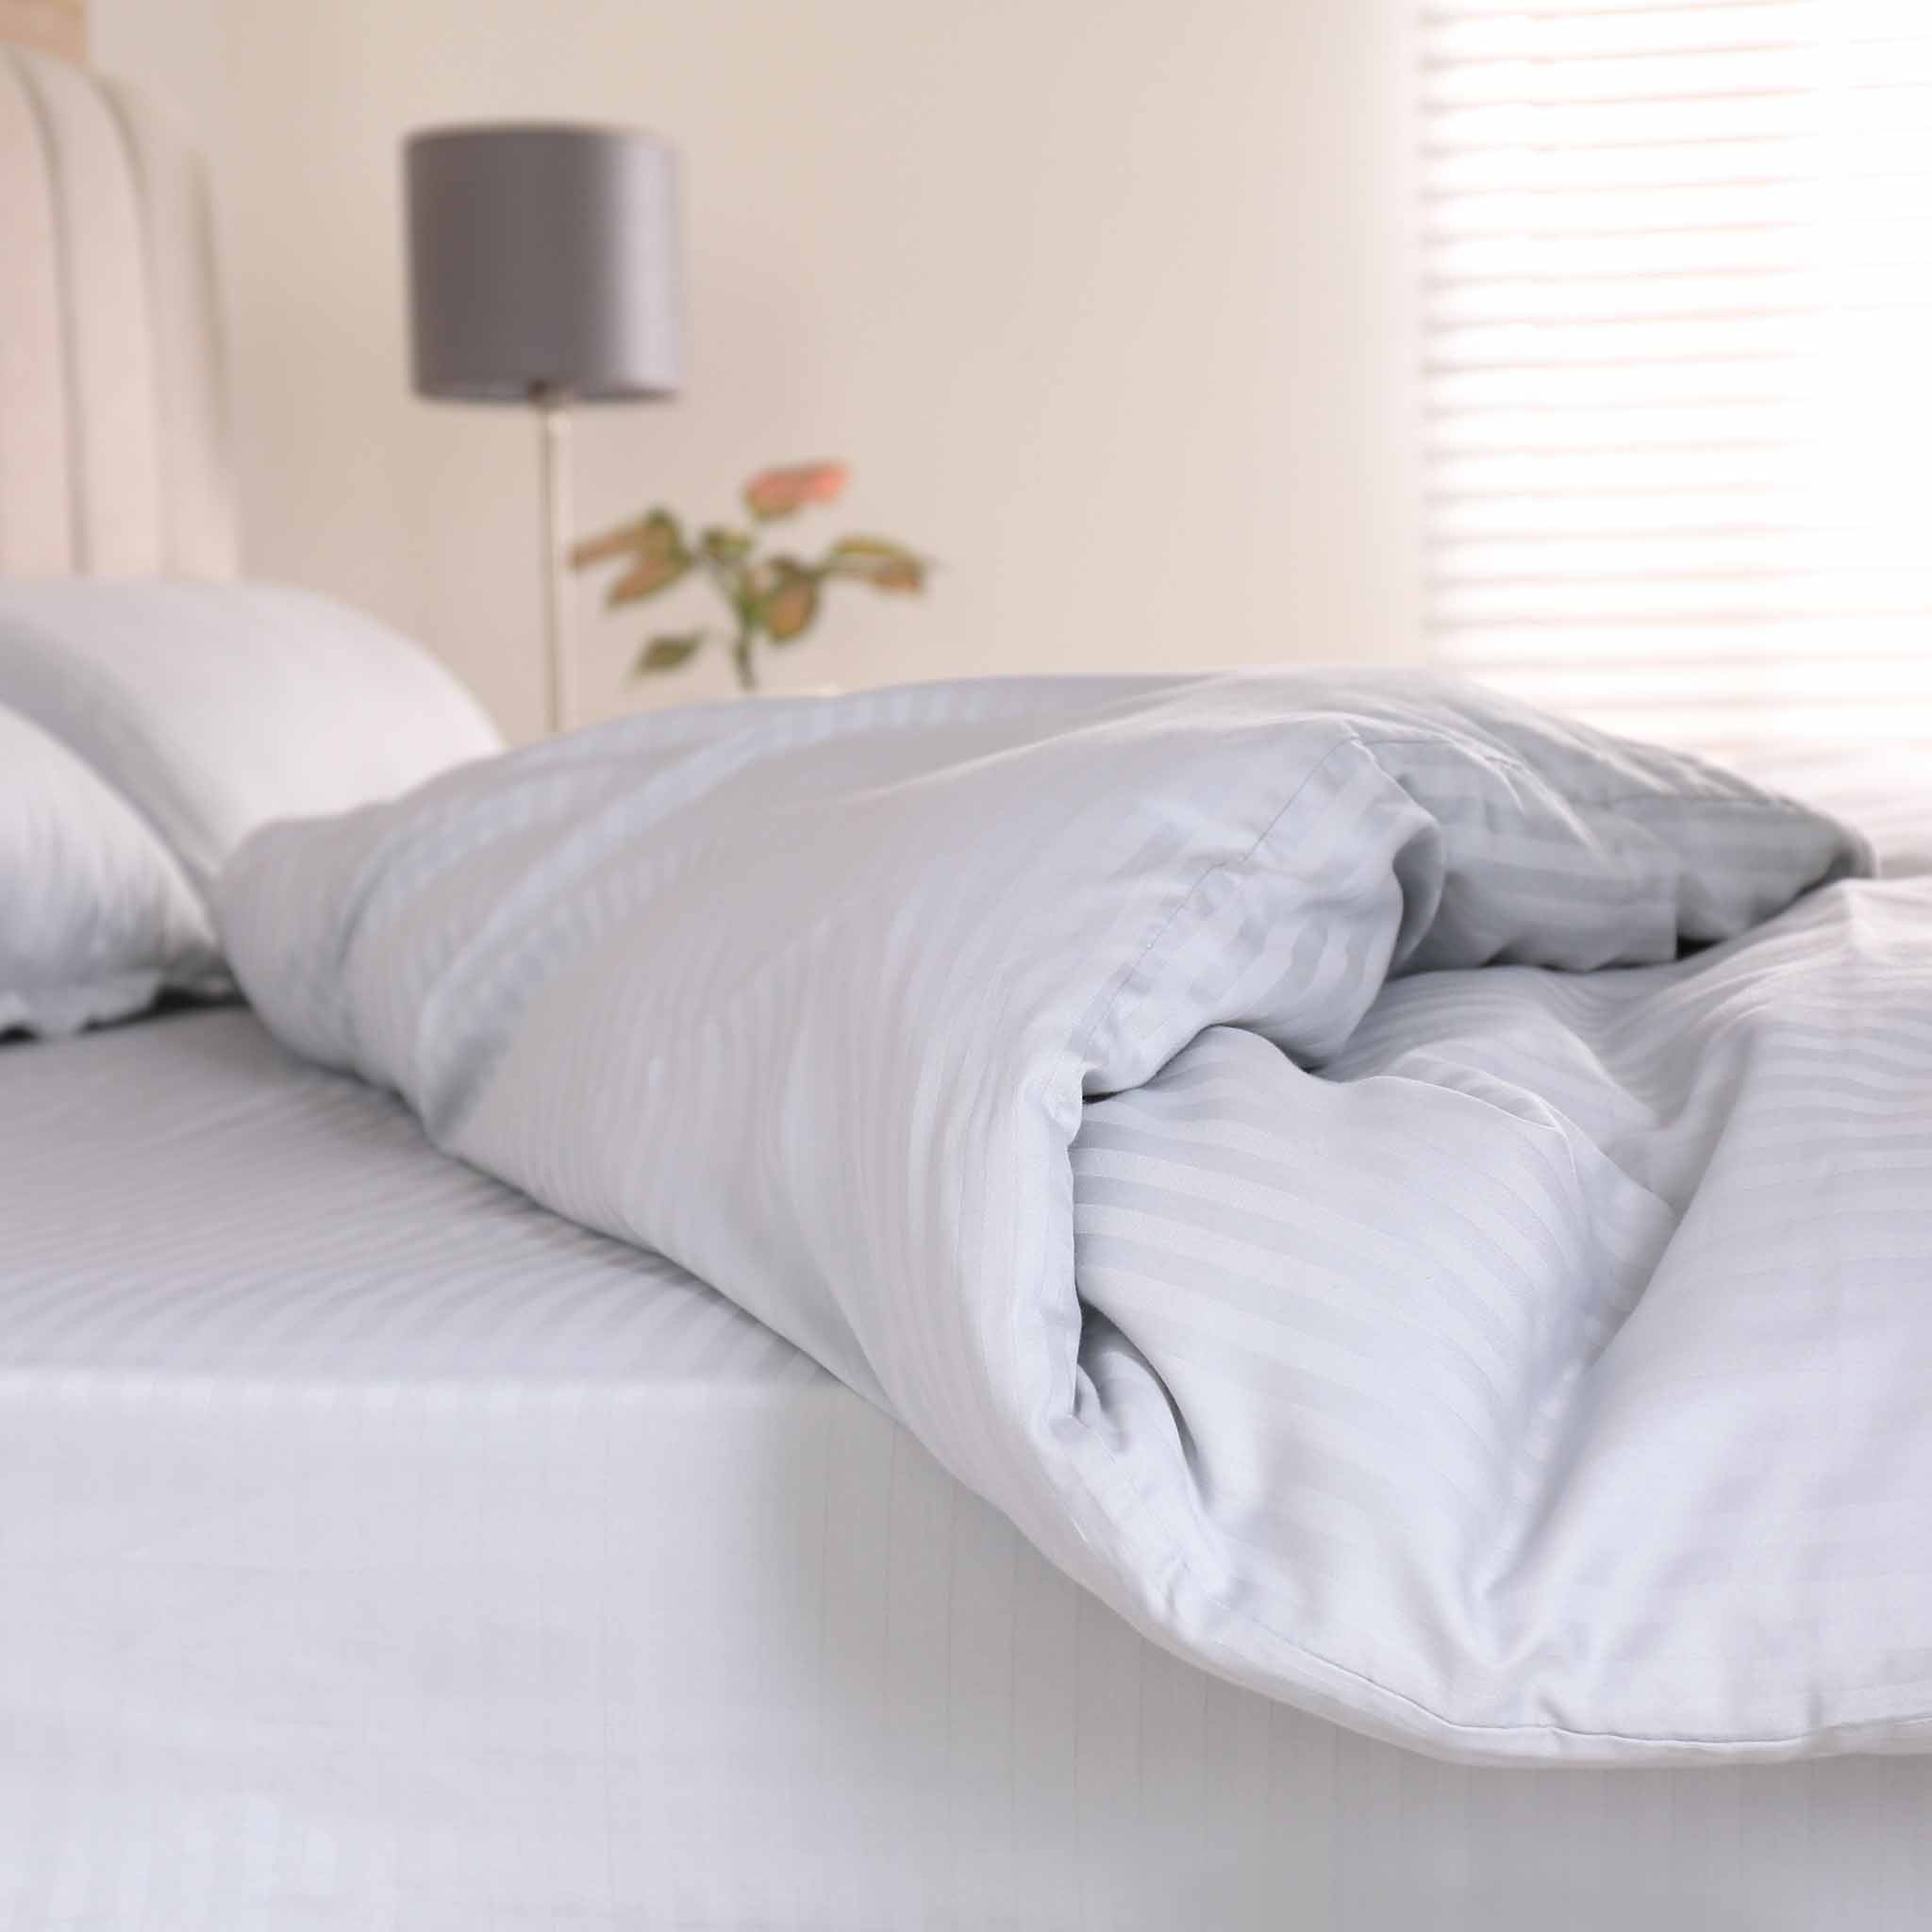 Comforter & Duvet Covers - Just because you suffer from dust mite allergies does not mean you have to give up that favorite comforter. 